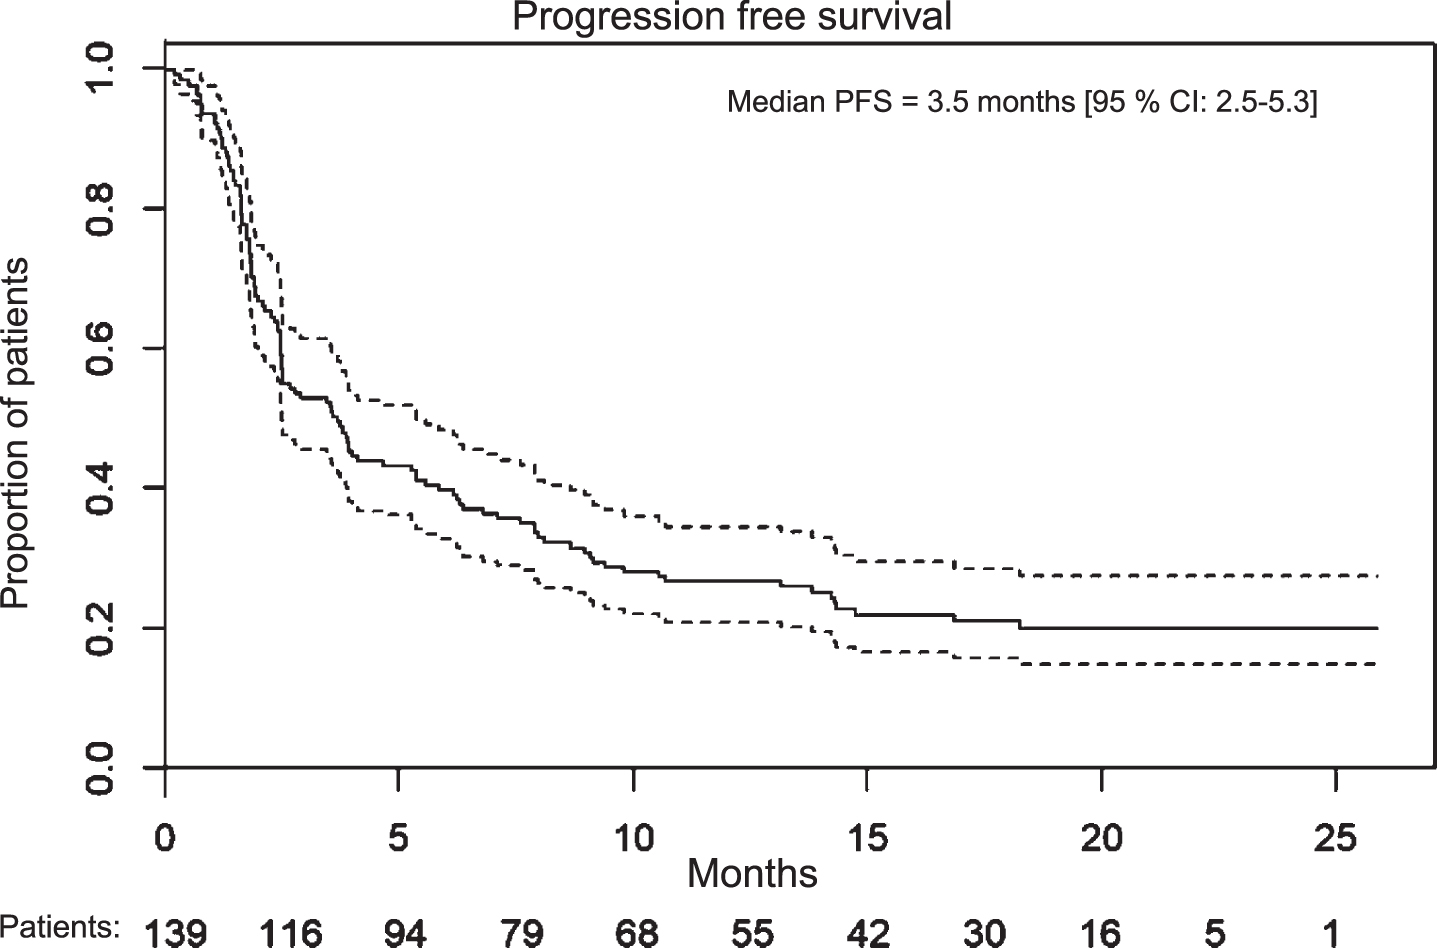 Progression free survival for all treatment lines combined.